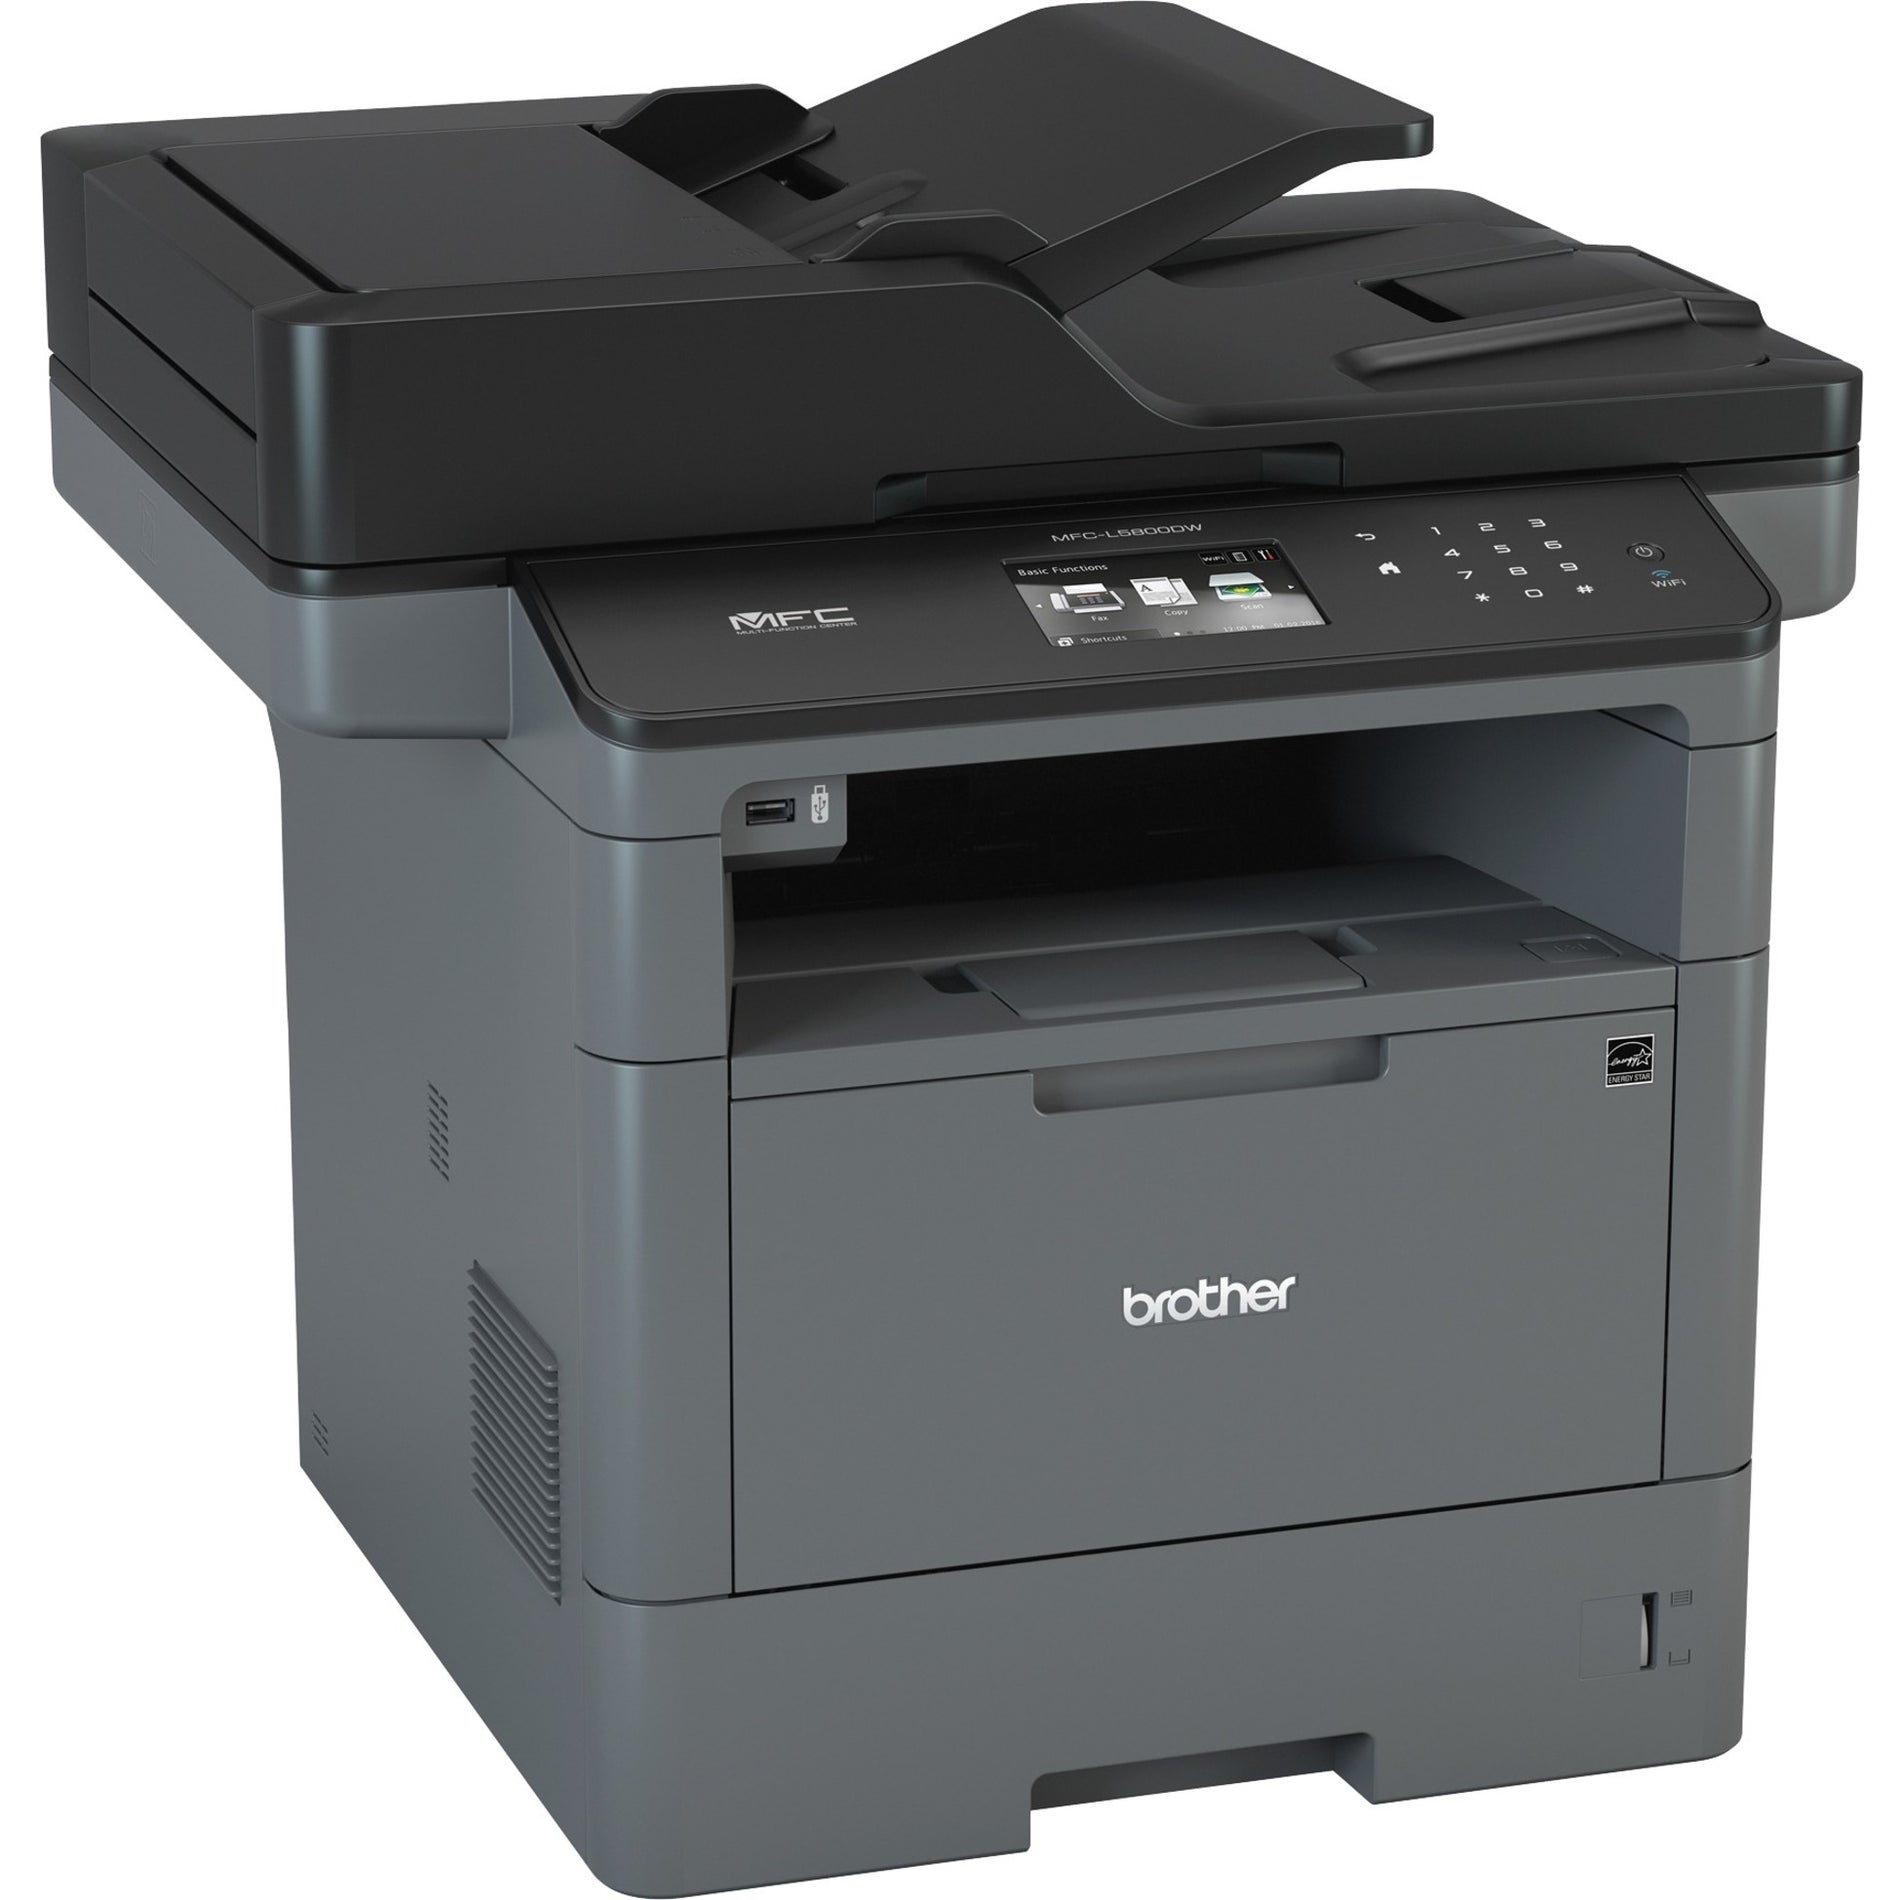 Brother MFCL5800DW MFC-L5800DW Laser All-in-one Printer, 42ppm, 300 Sht Cap, Black/Gray